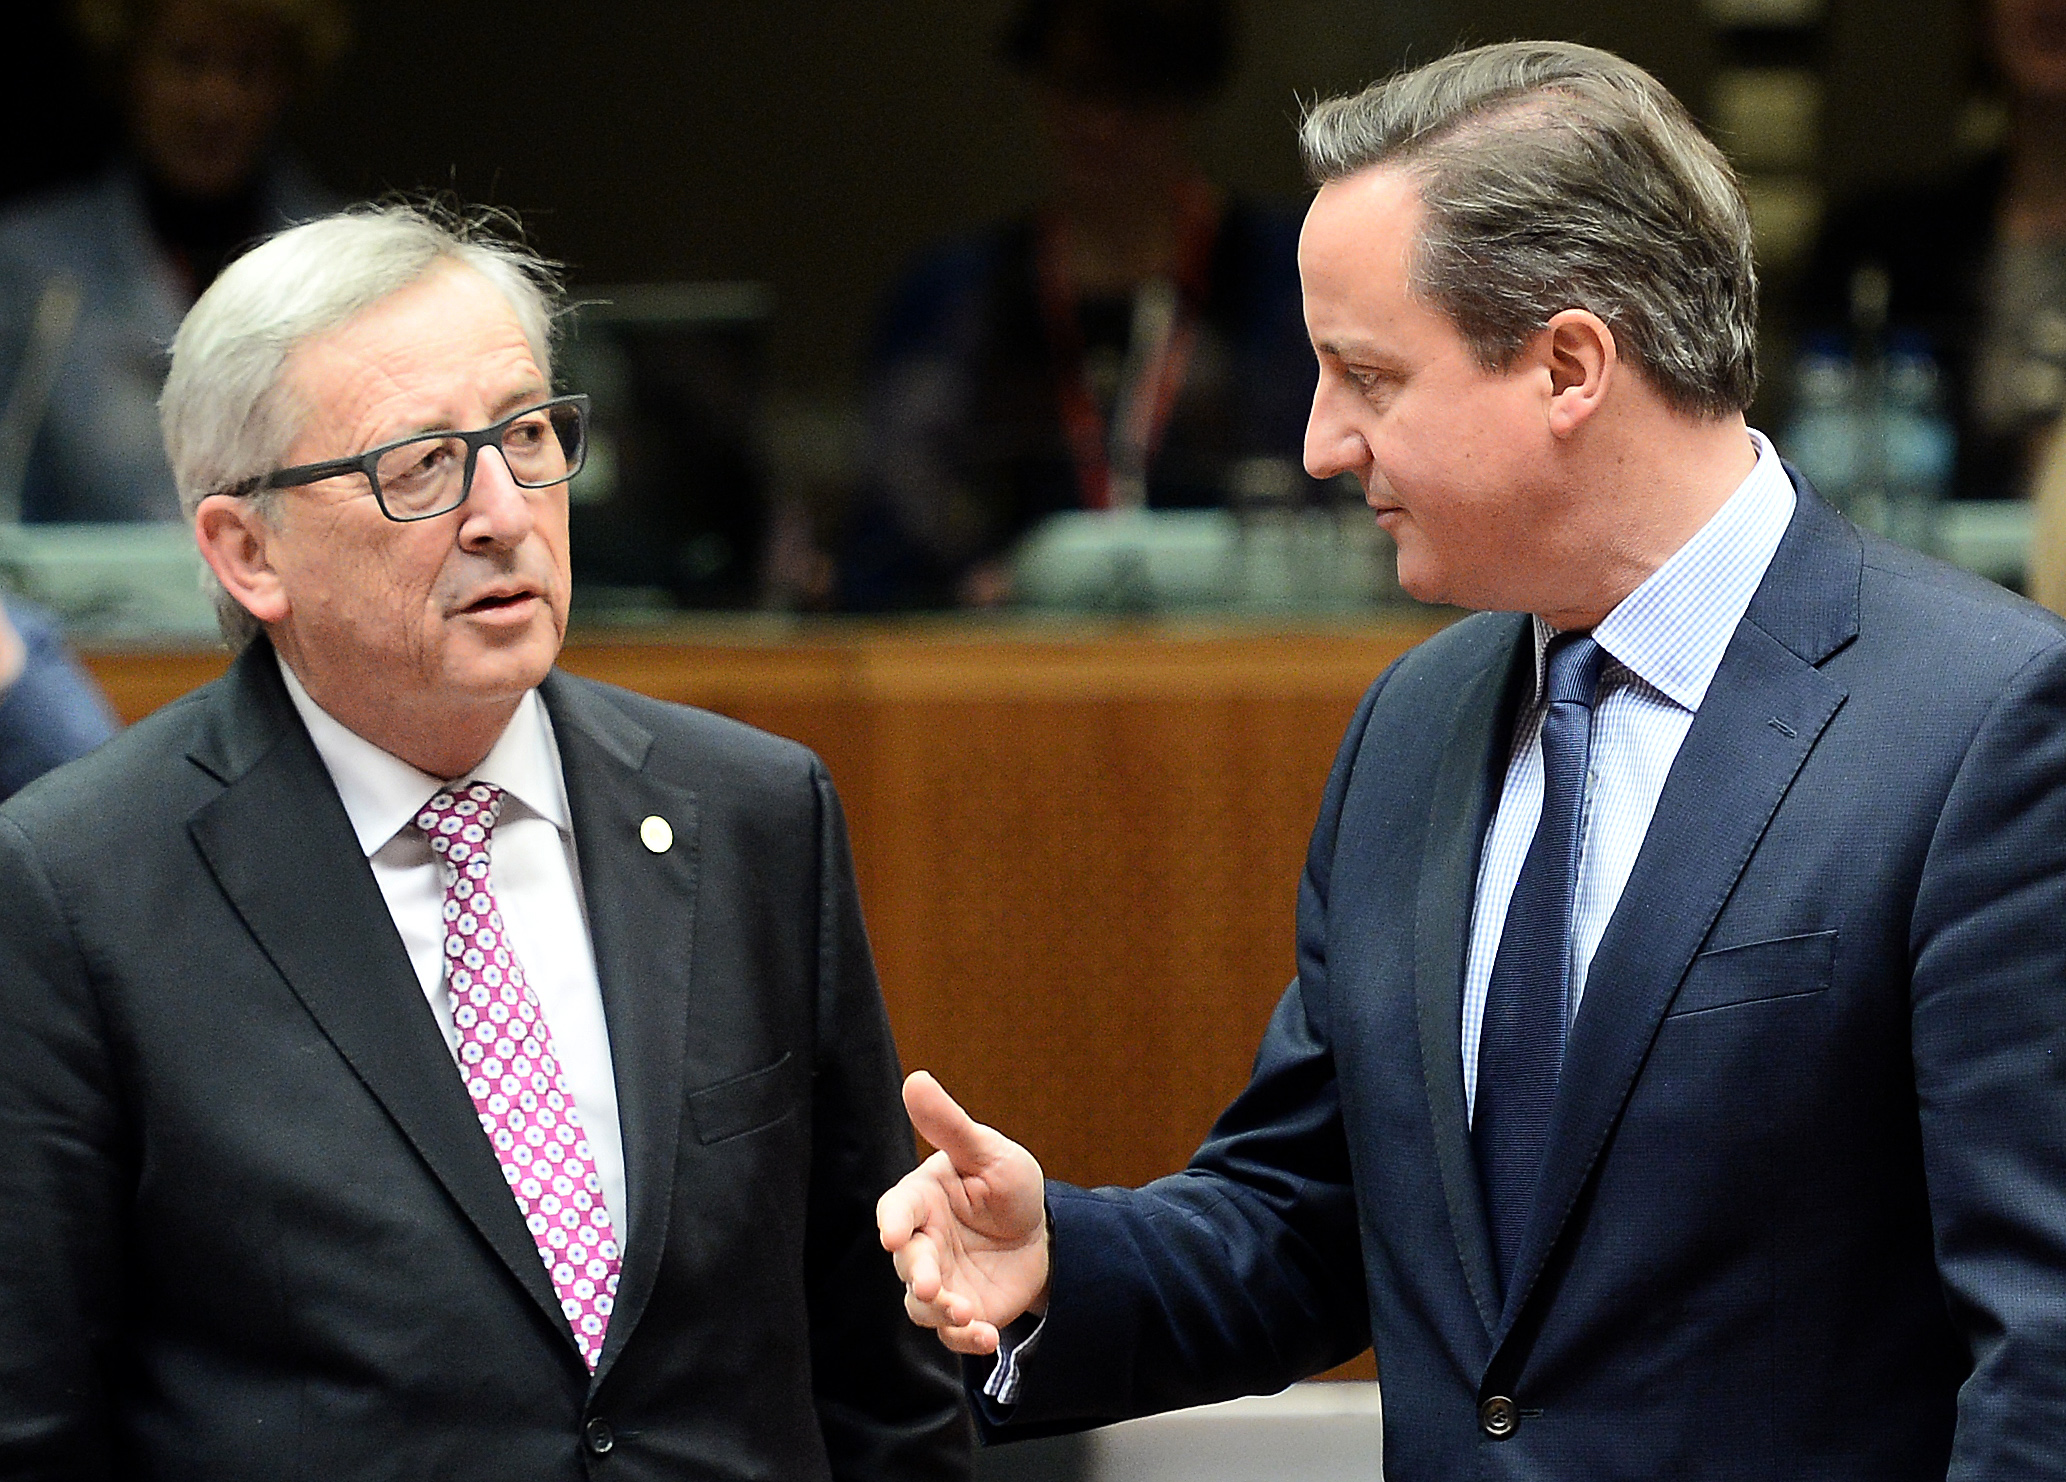 Juncker (left) and David Cameron at an EU summit in 2016.